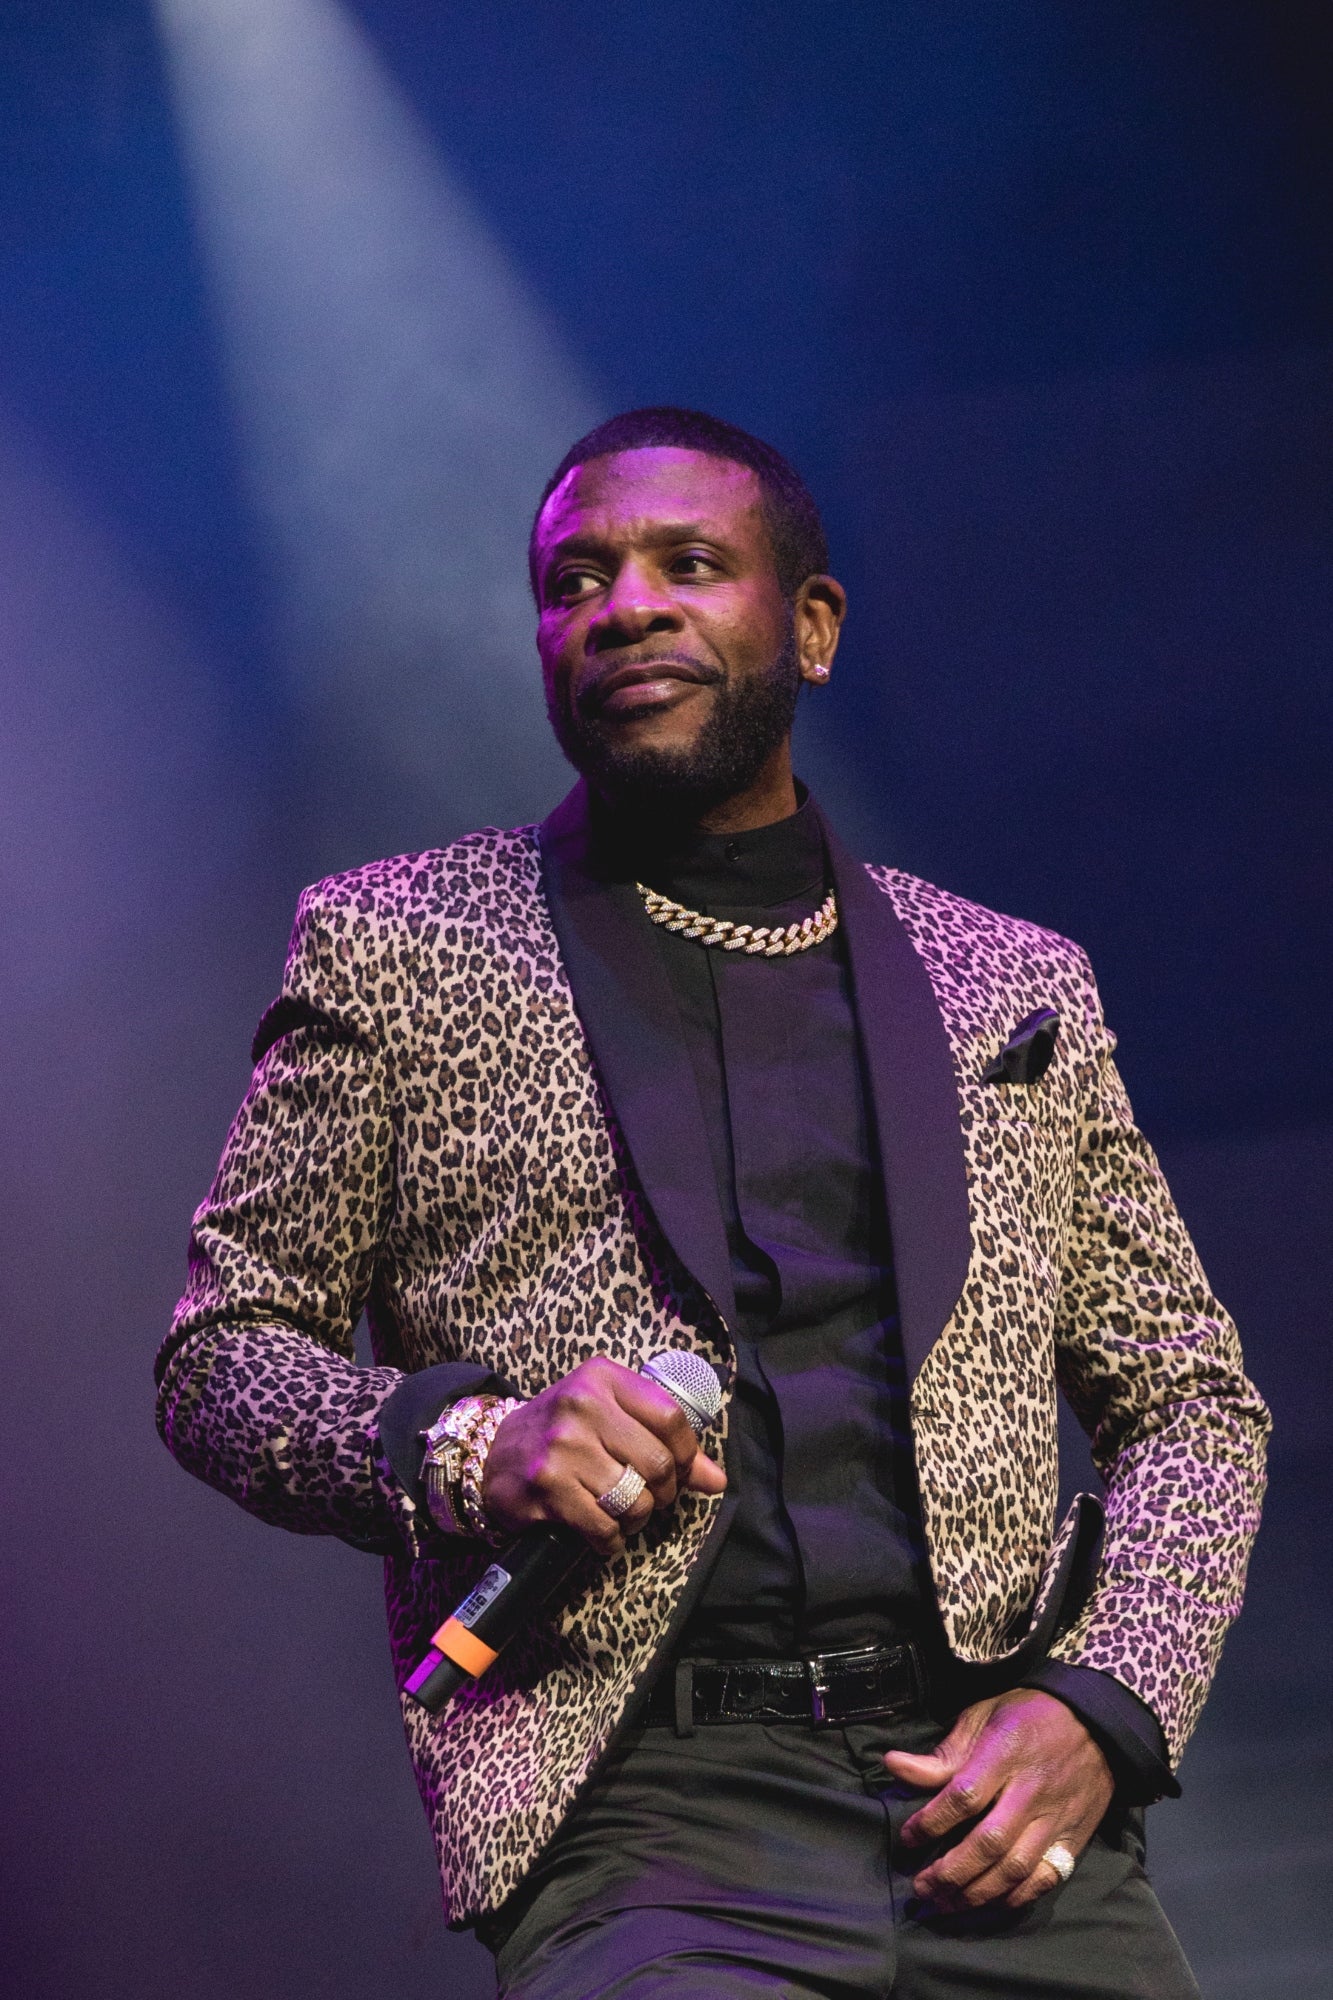 Our Favorite Photos of Birthday Boy Keith Sweat Showing Off His Signature Swag On Stage